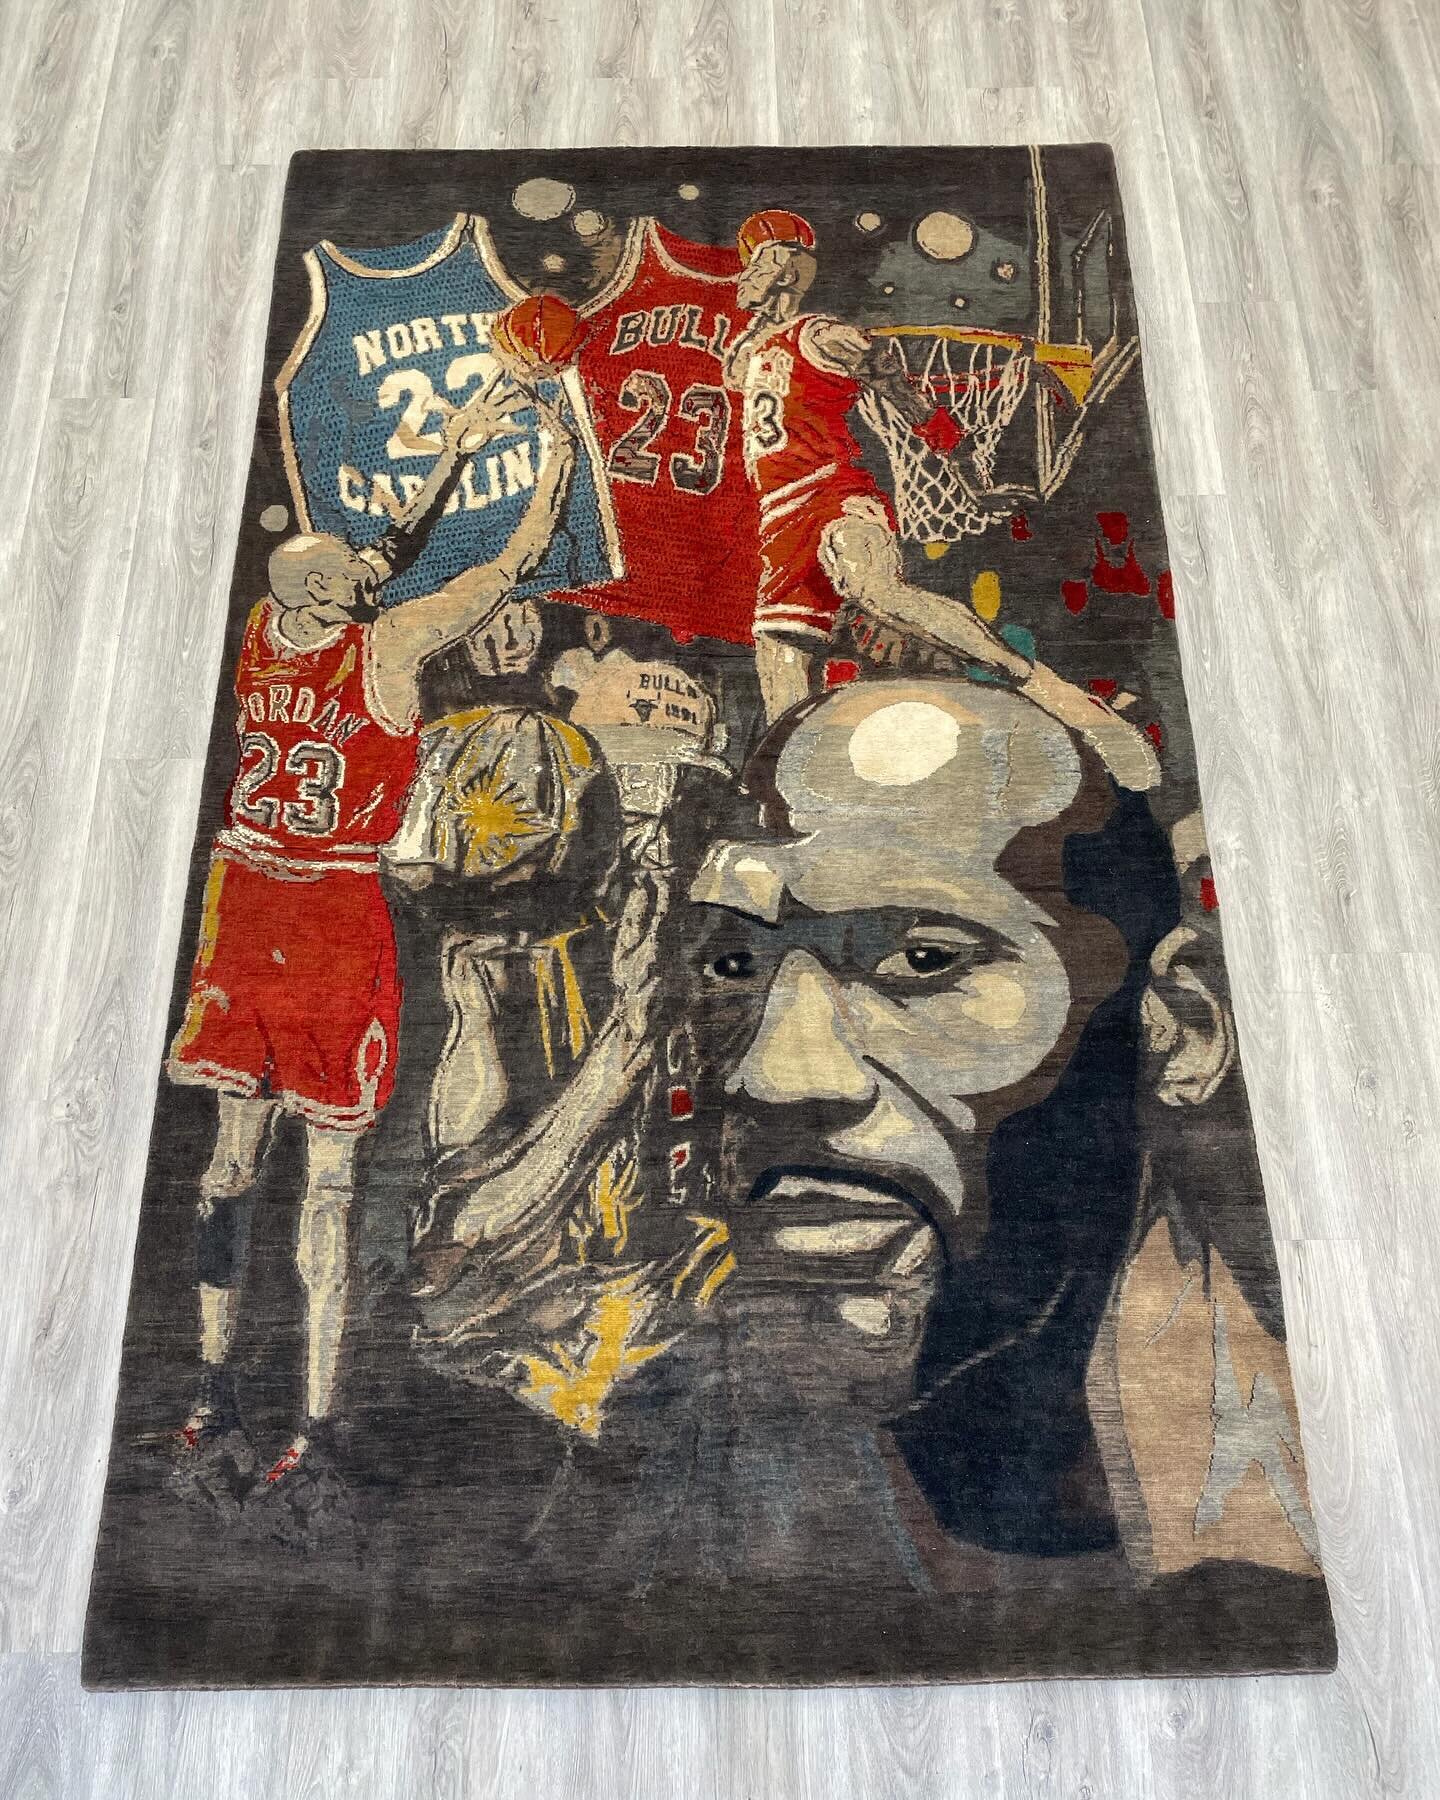 Jumpman 2️⃣3️⃣ a 1/1 custom piece hand-knotted with a combo of wool and silk 🐐 🦅 design by @jeffhamilton

#jeffhamilton #jumpman23 #airjordan #customrug #rugart #rugdesign #rugsjpeg #rugmaking #rugplug